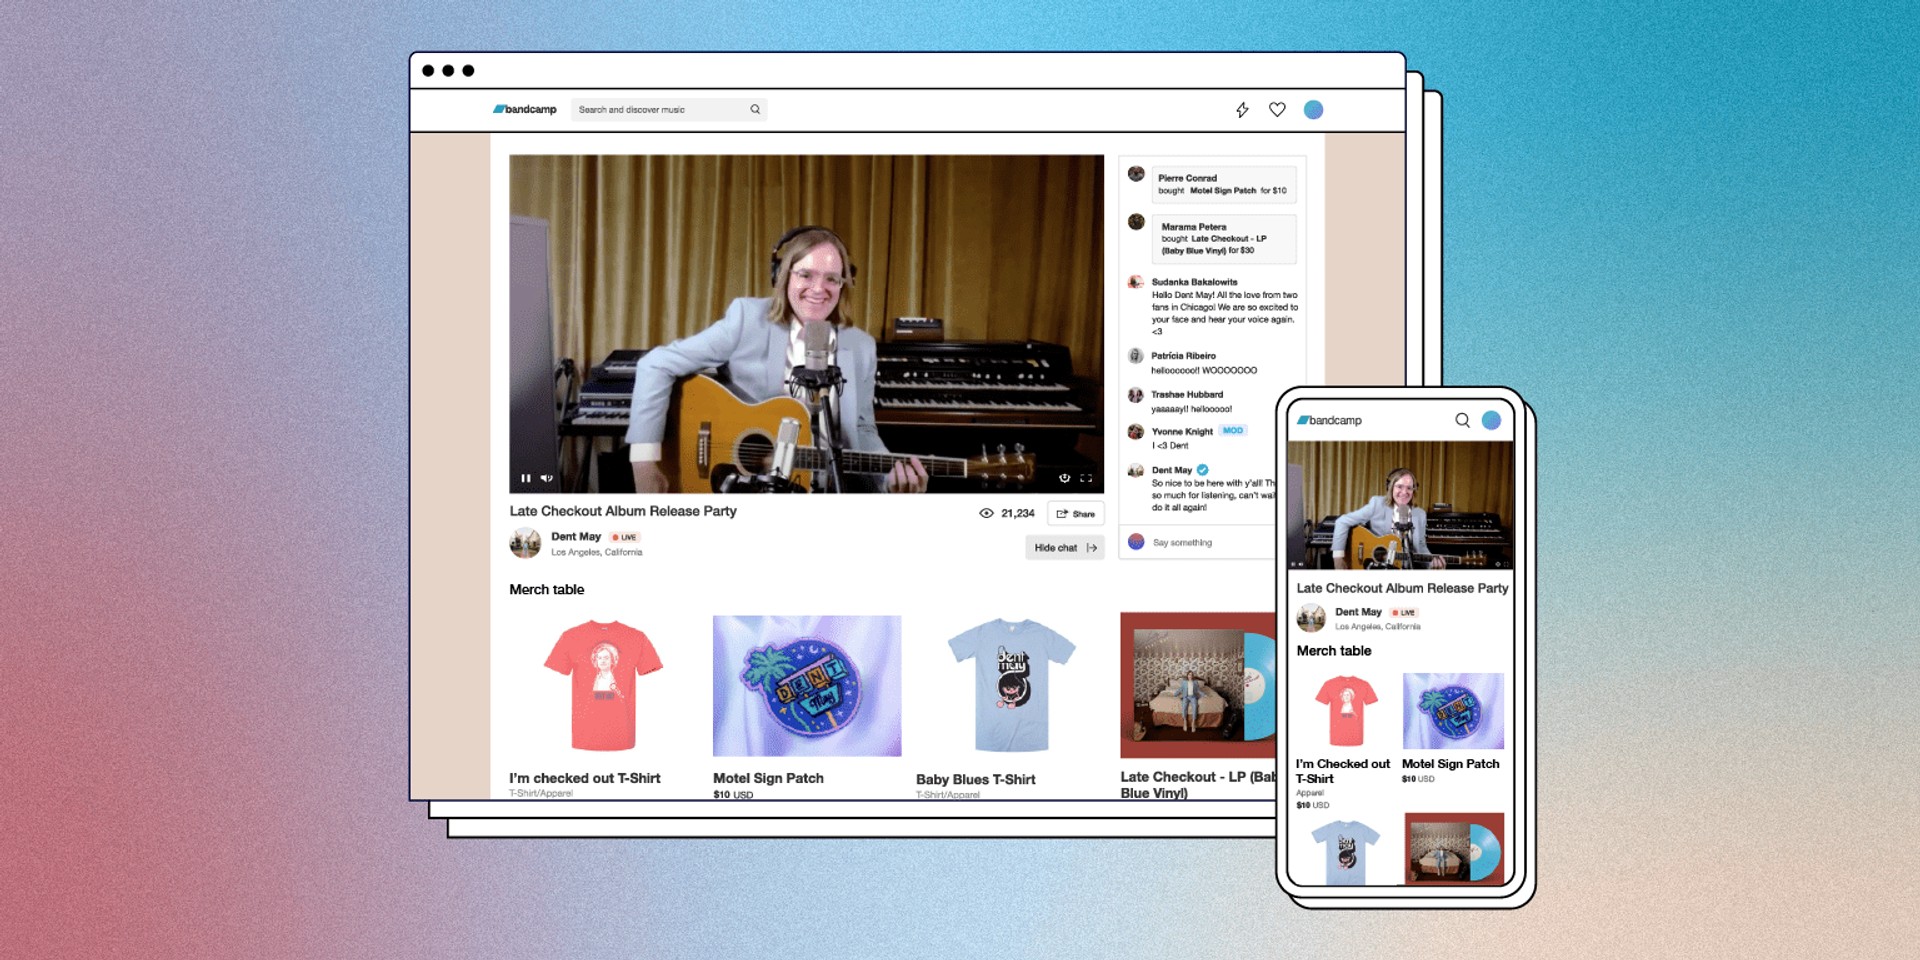 Bandcamp launches new paid livestream service 'Bandcamp Live'